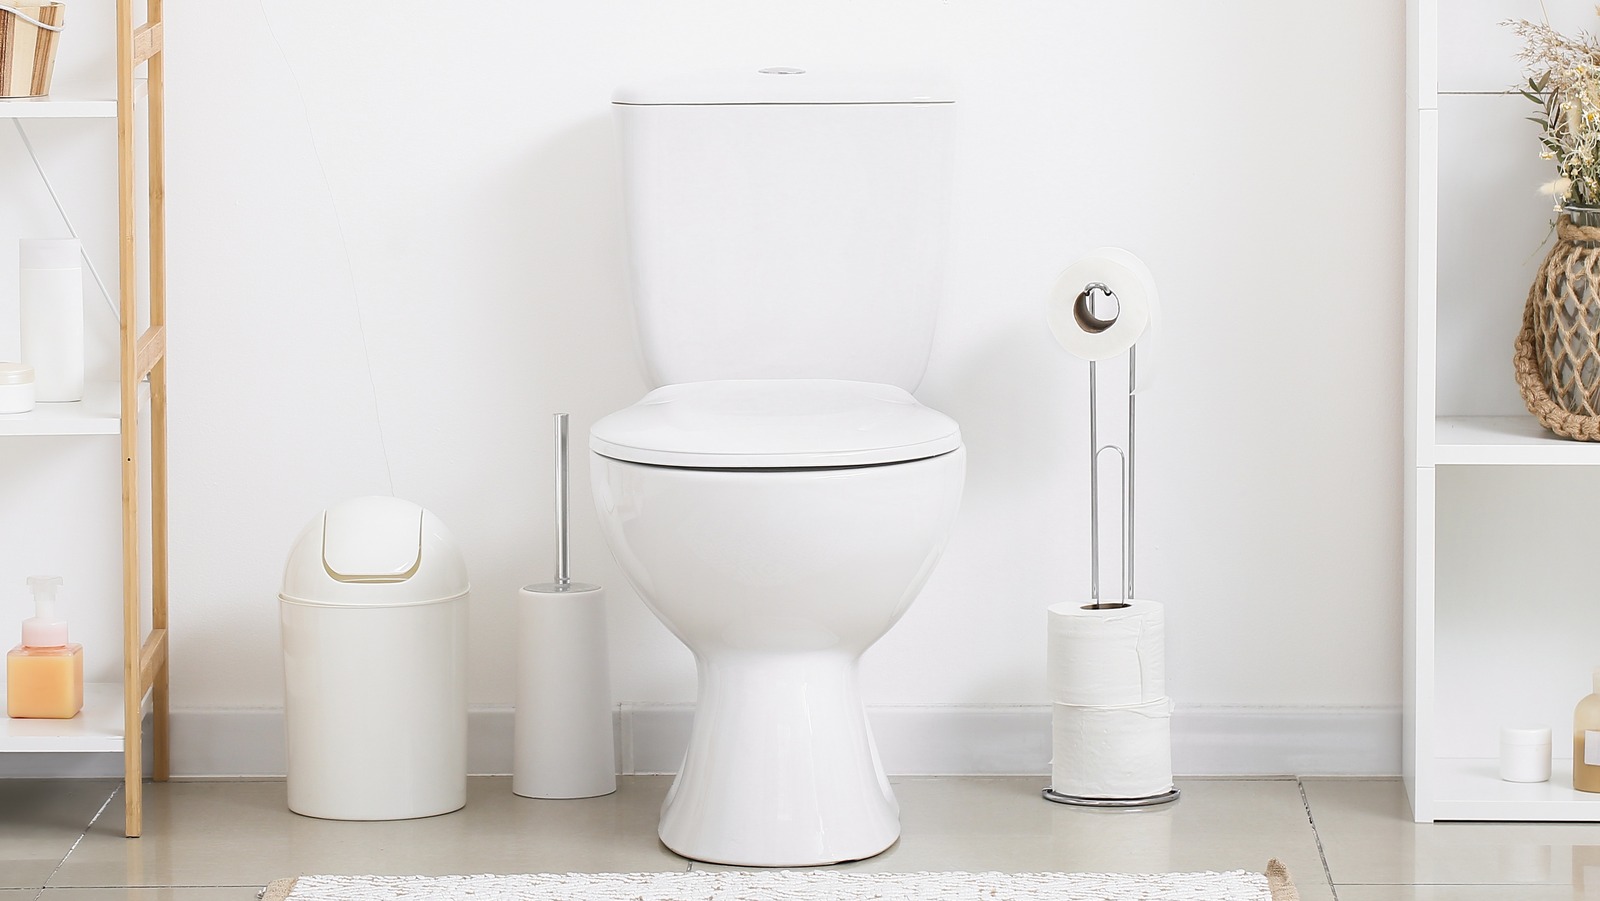 https://www.housedigest.com/img/gallery/types-of-toilet-bowls-you-should-know/l-intro-1679746837.jpg